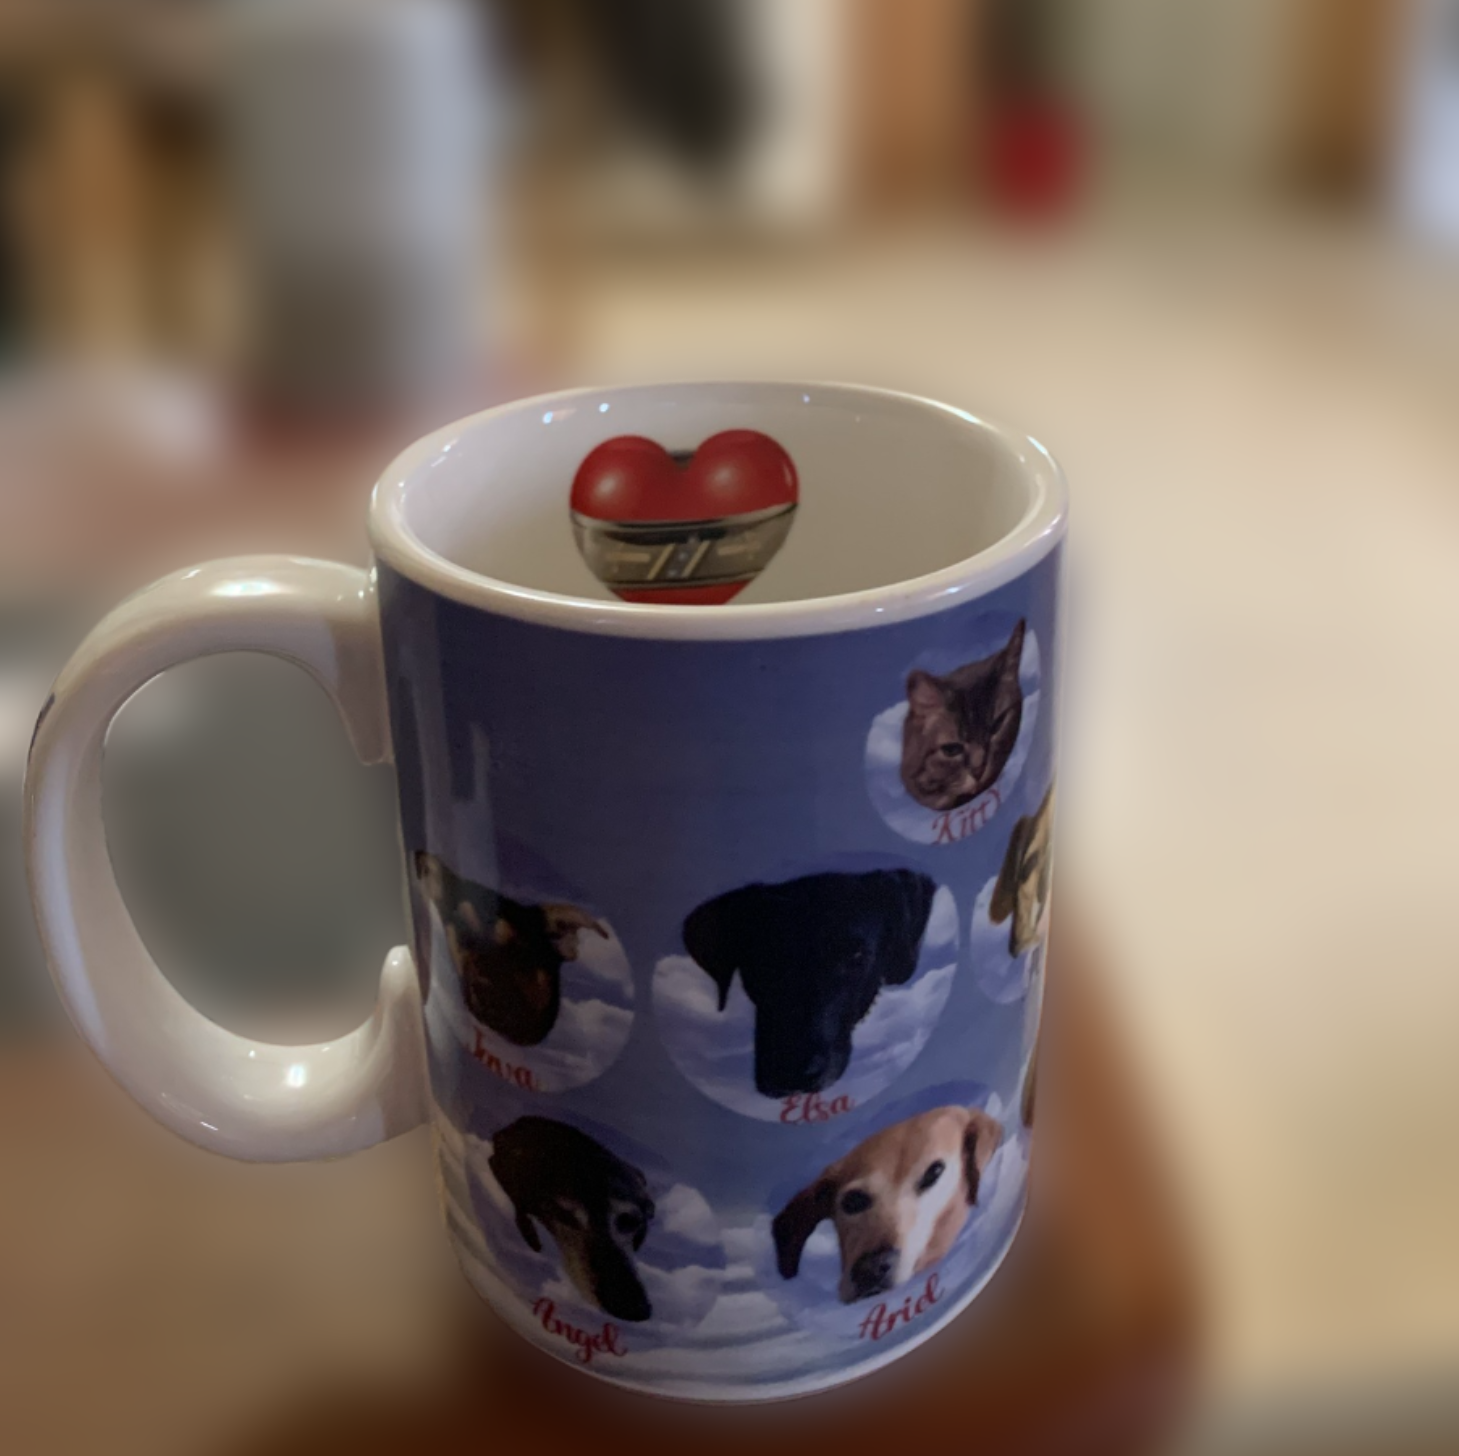 The Mugs Were Printed With Photos Of HIs Pets Through The Years